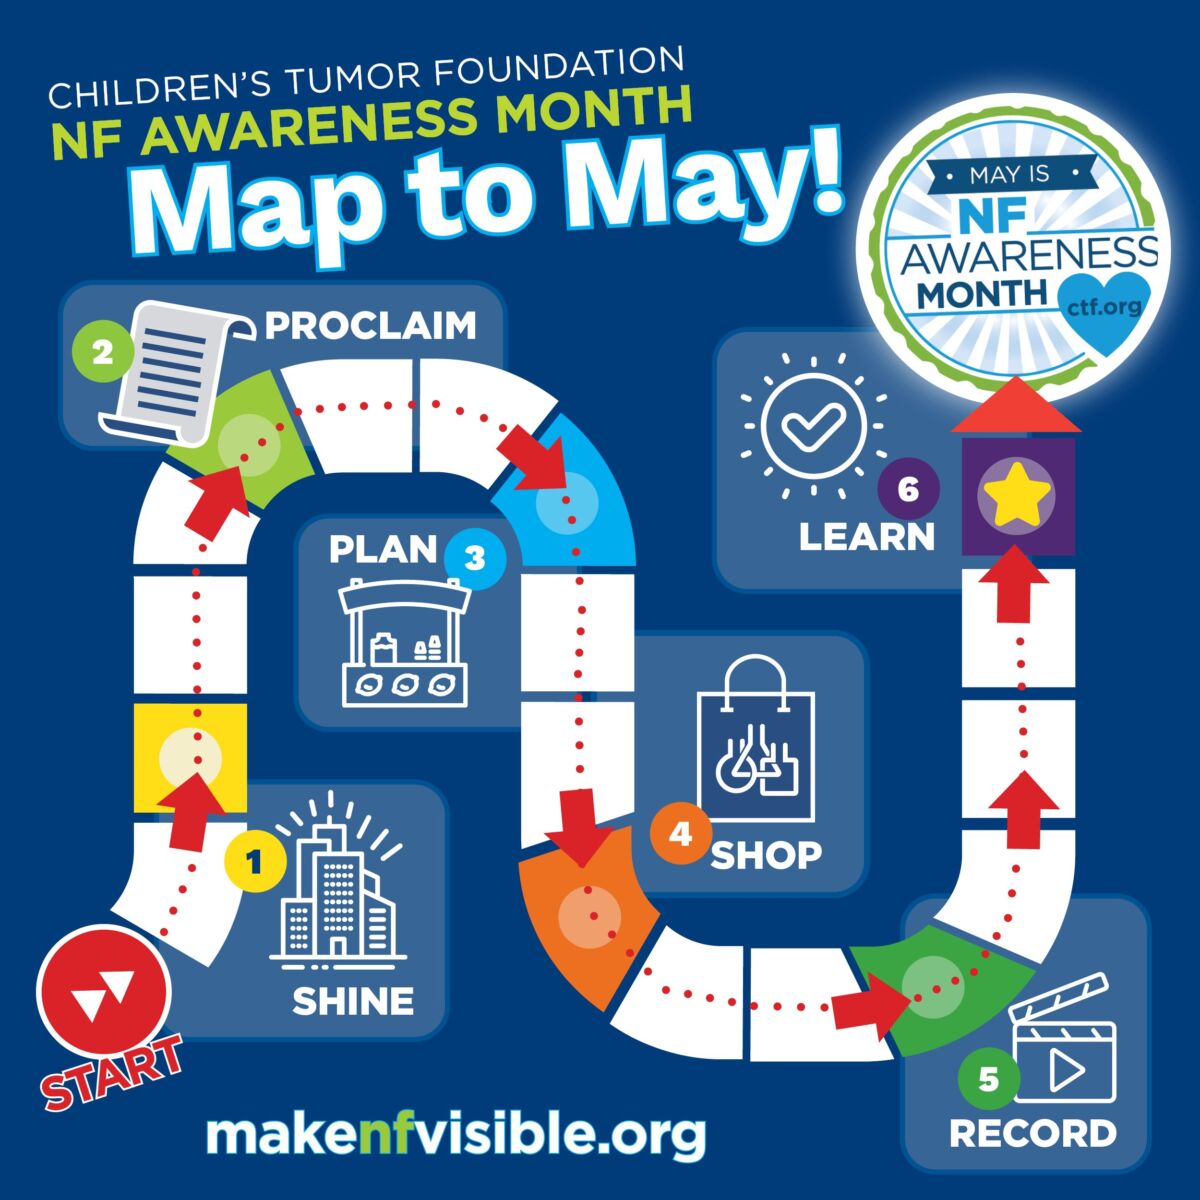 Infographic titled "map to may!" promoting awareness activities for neurofibromatosis (nf) awareness month, illustrating a step-by-step path starting with "shine a light on nf" and.